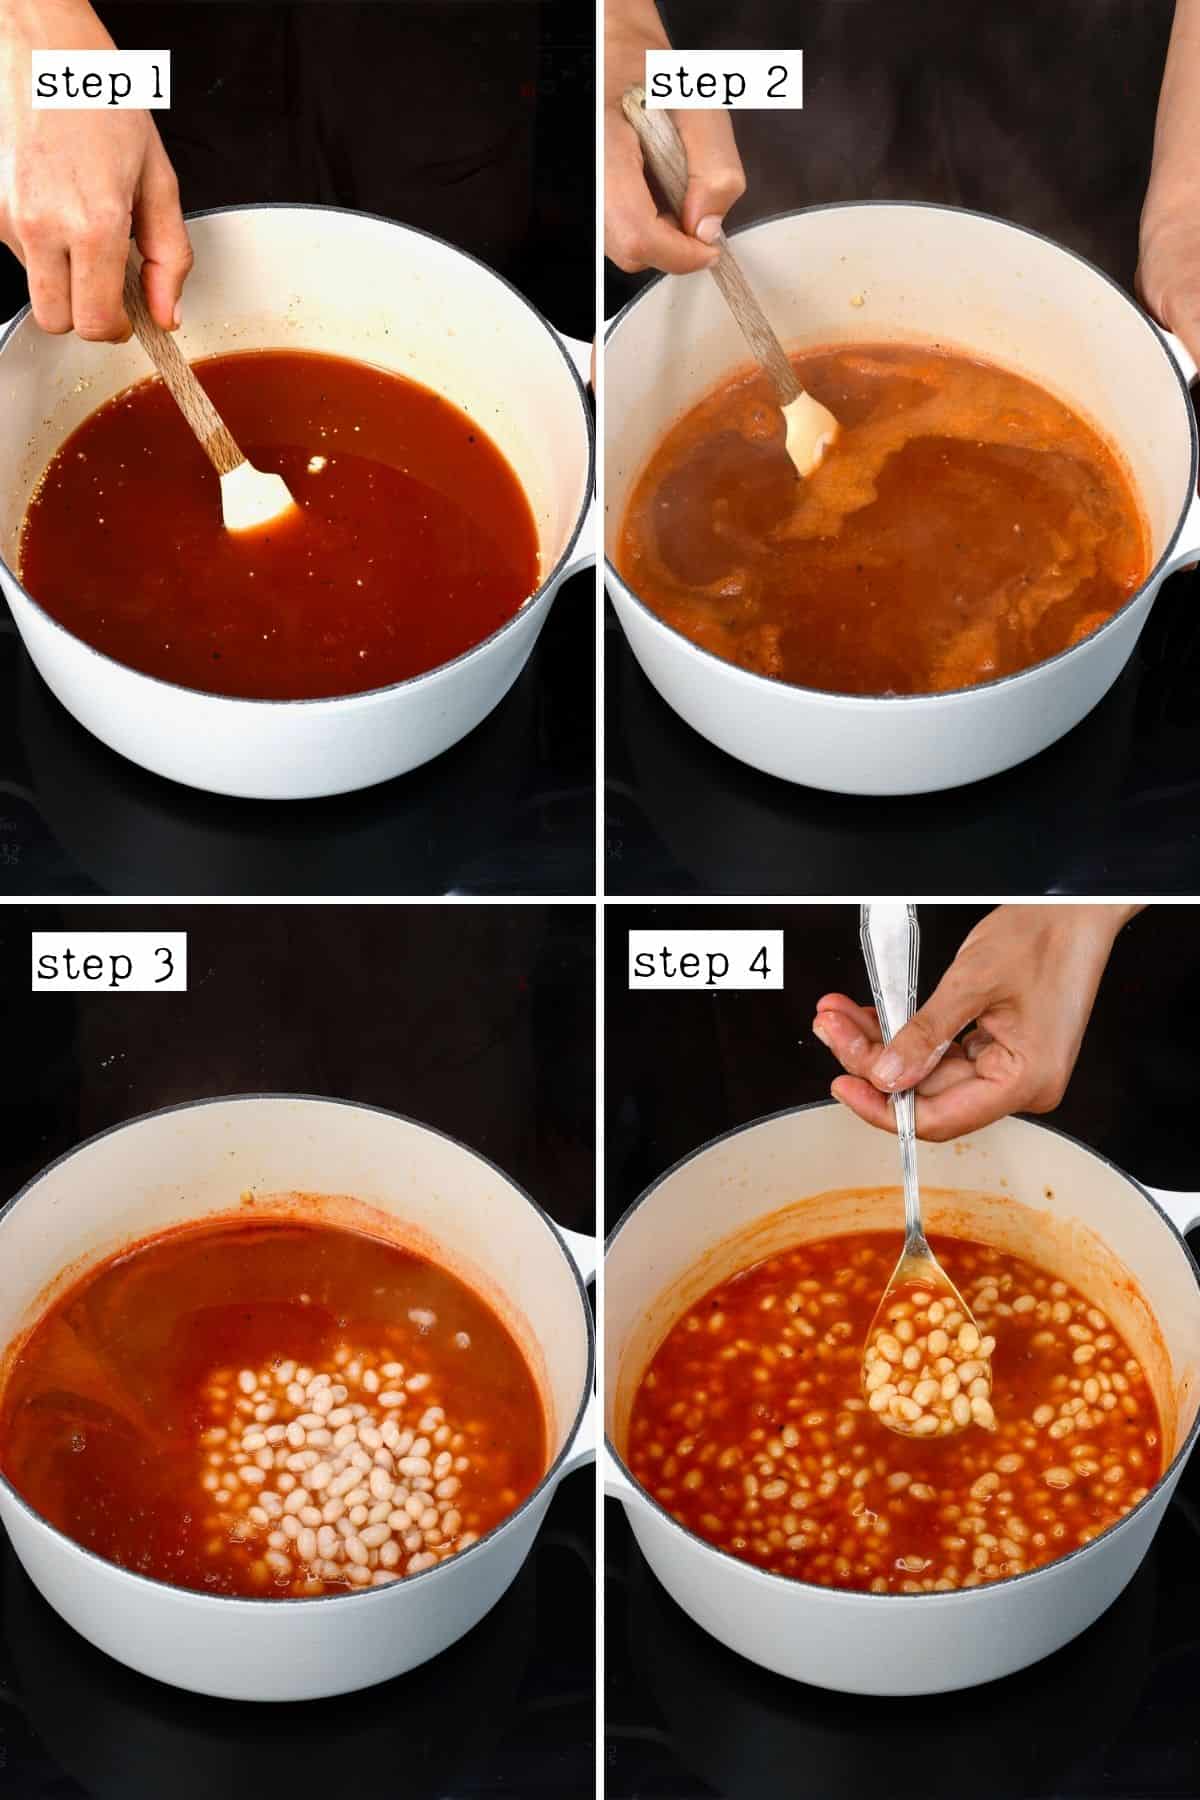 Steps for cooking baked beans